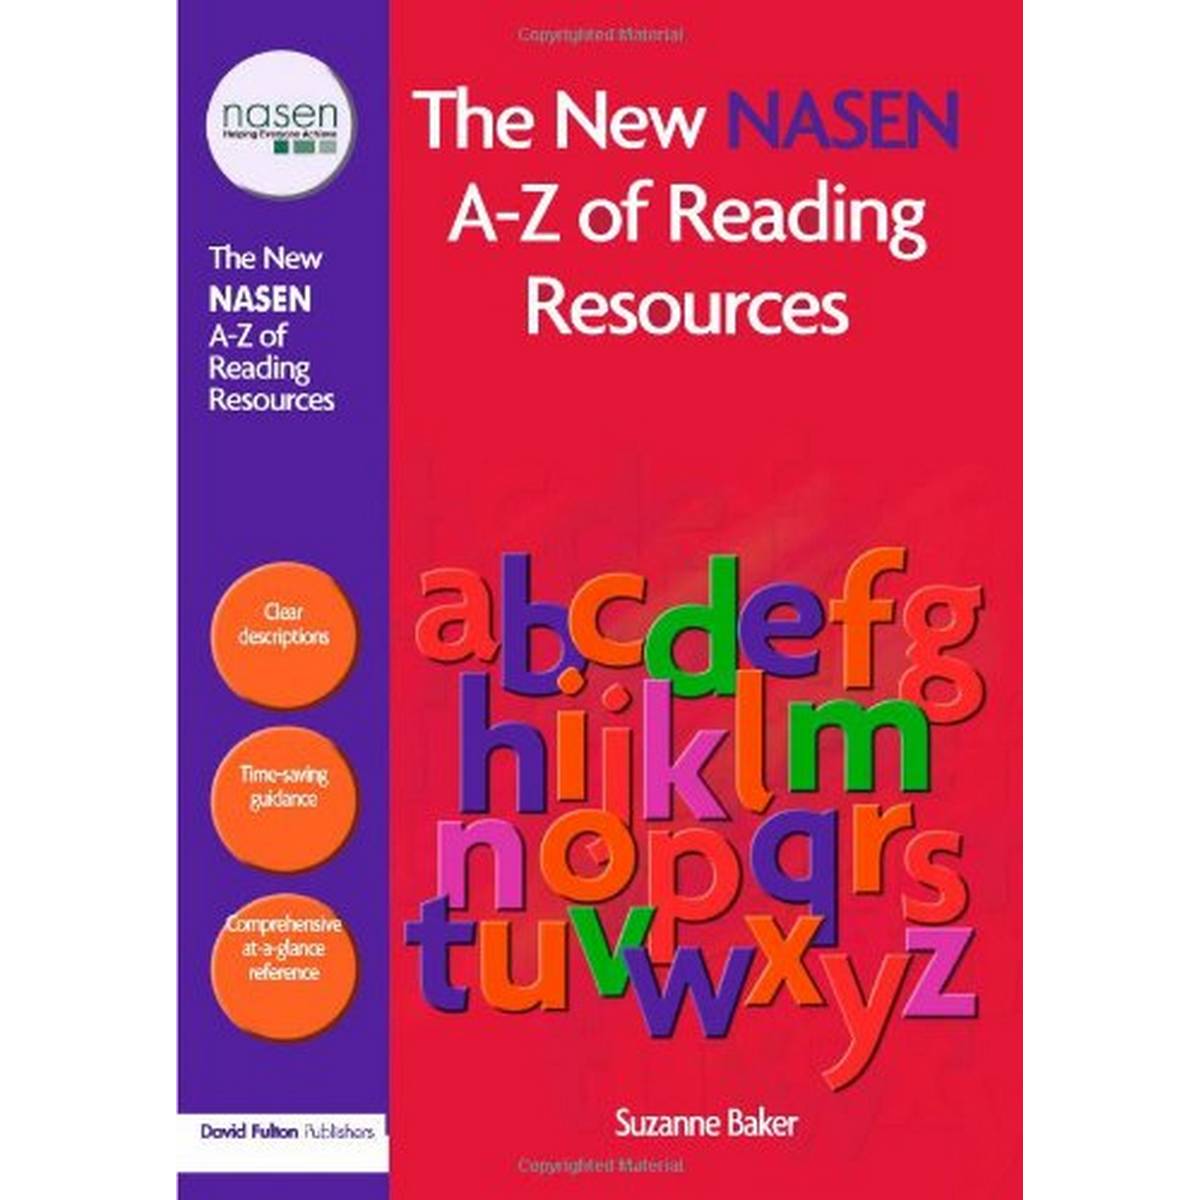 New Nasen A-Z of Reading Resources